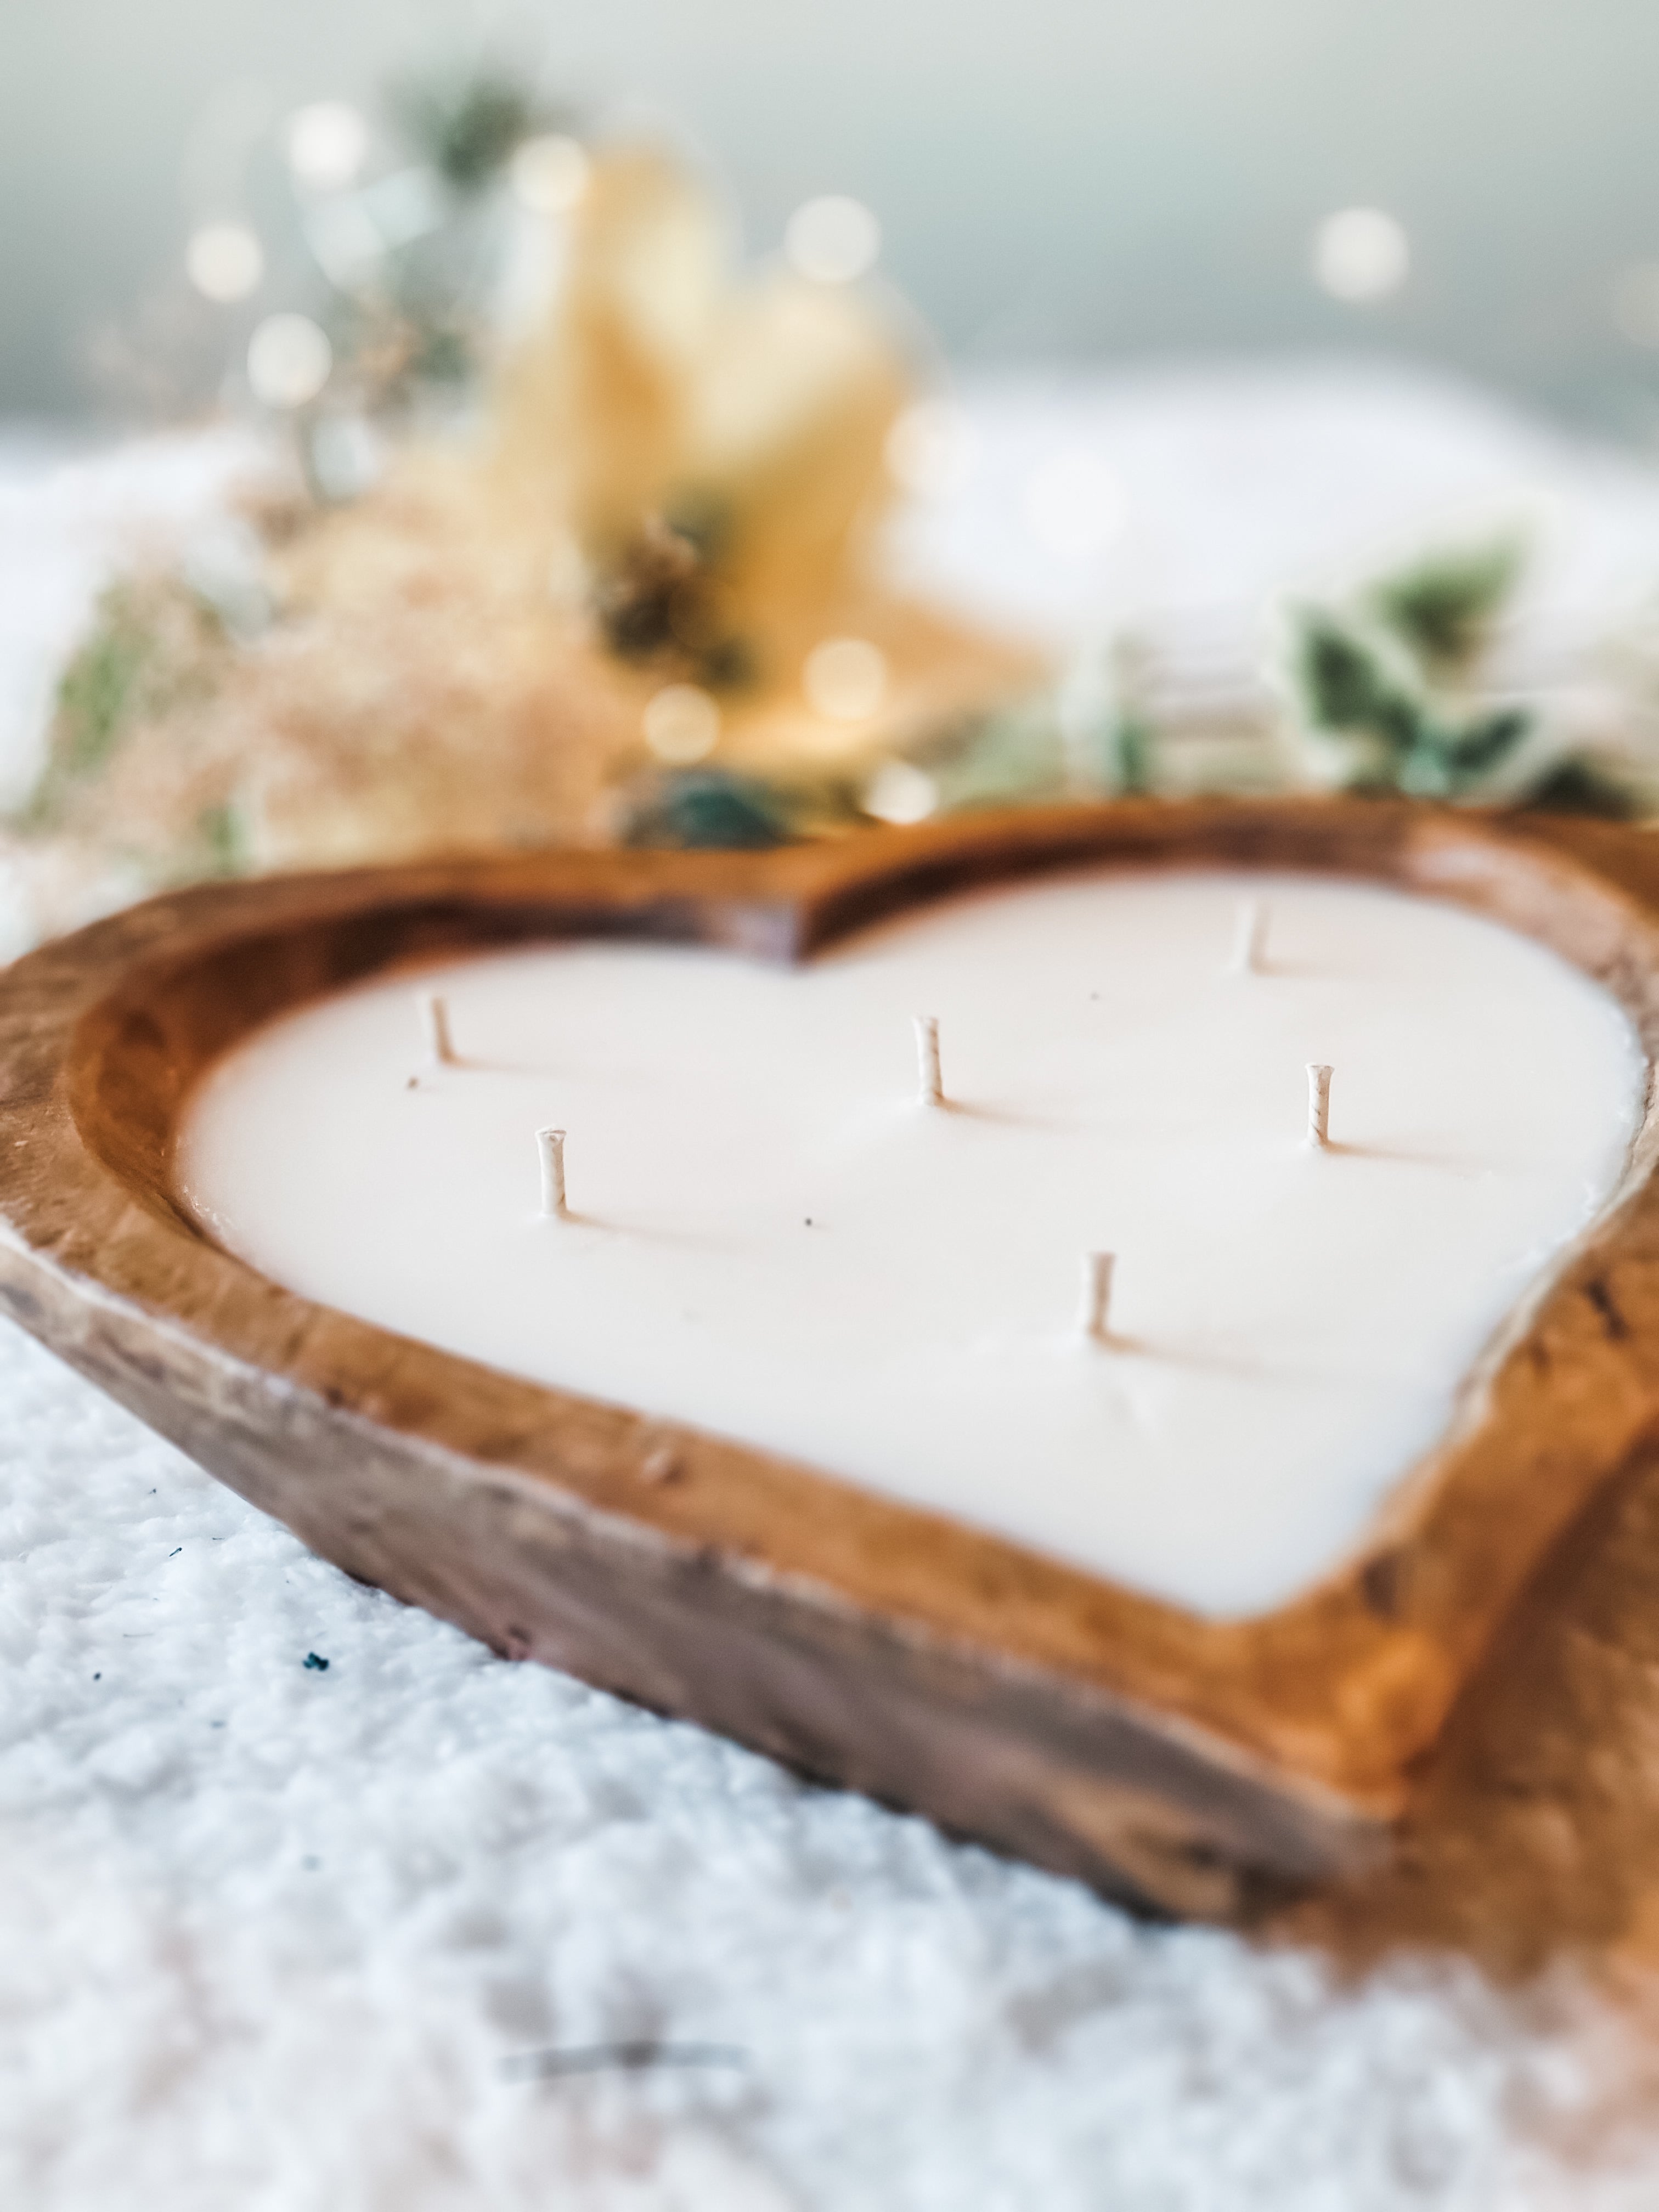 Dough Bowl Candle - Heart shaped, 6 wick